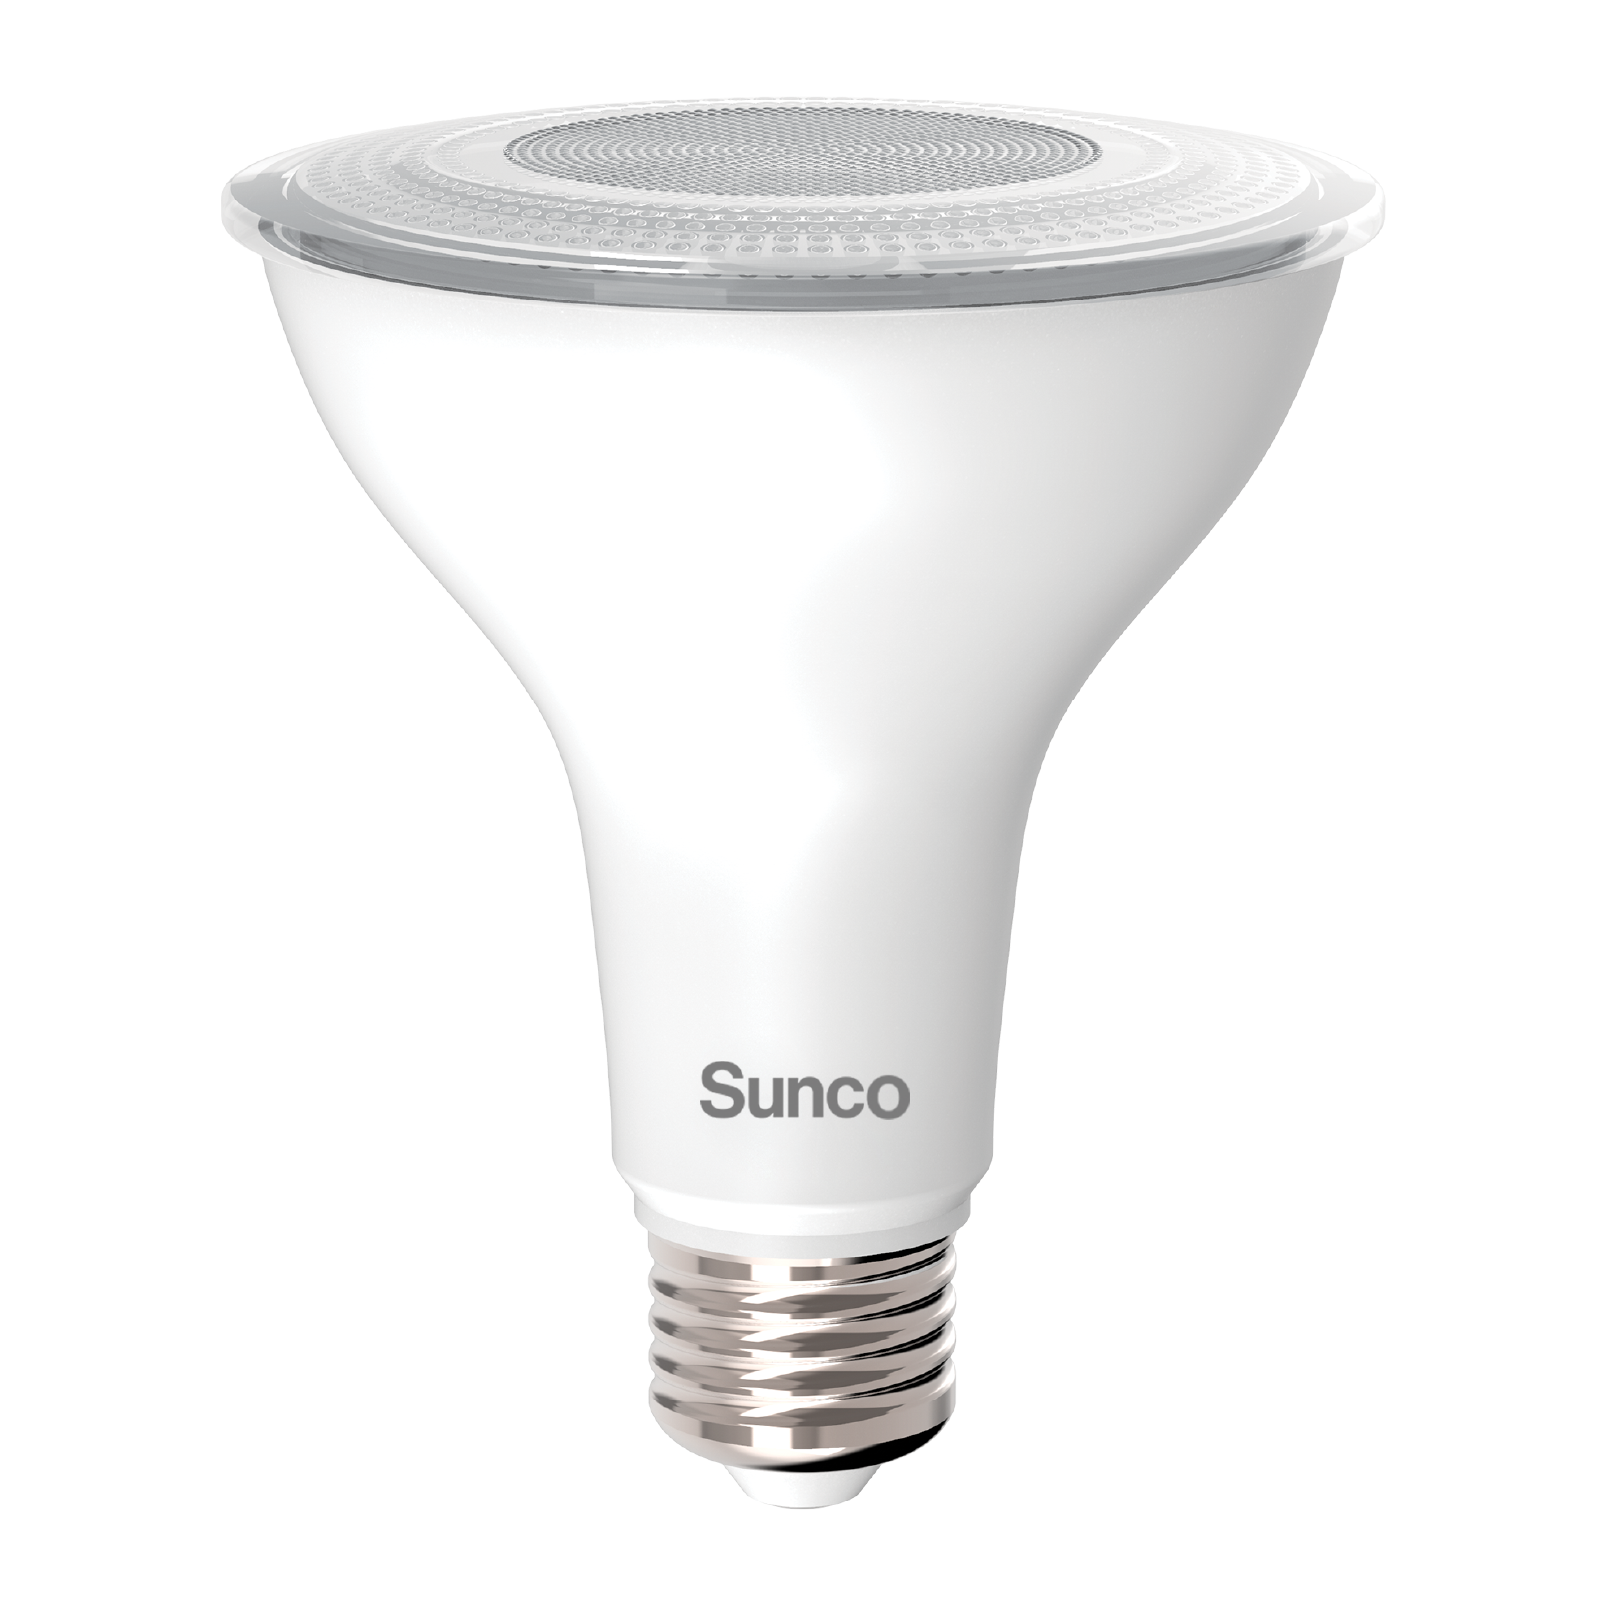 Sunco Lighting PAR30 LED Bulb with an E26 base is dimmable, IP65 rated so it is wet rated for outdoor use. Ideal as a spotlight with its narrow 40-degree light beam. This is an 11W bulb that is a 75W equivalent. This lamp is wet rated as an exterior lighting solution or you can use it in wet areas inside like your bathroom or kitchen. PAR spot light bulbs are great in recessed cans as downlights for task lighting inside or to highlight landscape features and architecture outside.